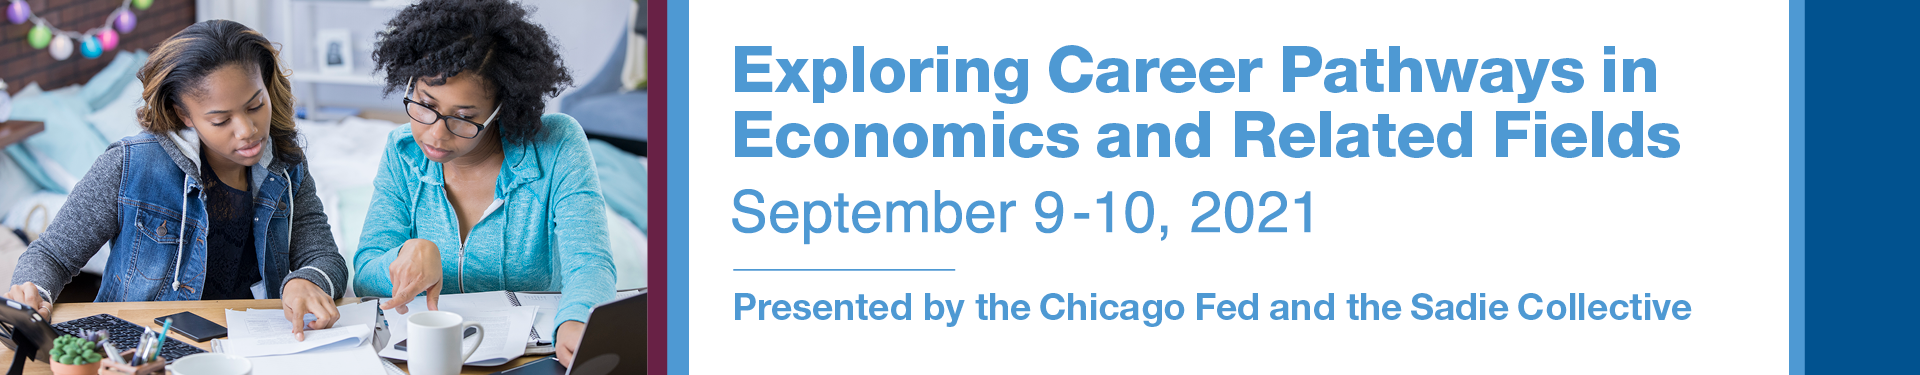 Exploring Career Pathways in Economics and Related Fields, Sept. 9-10, 2021